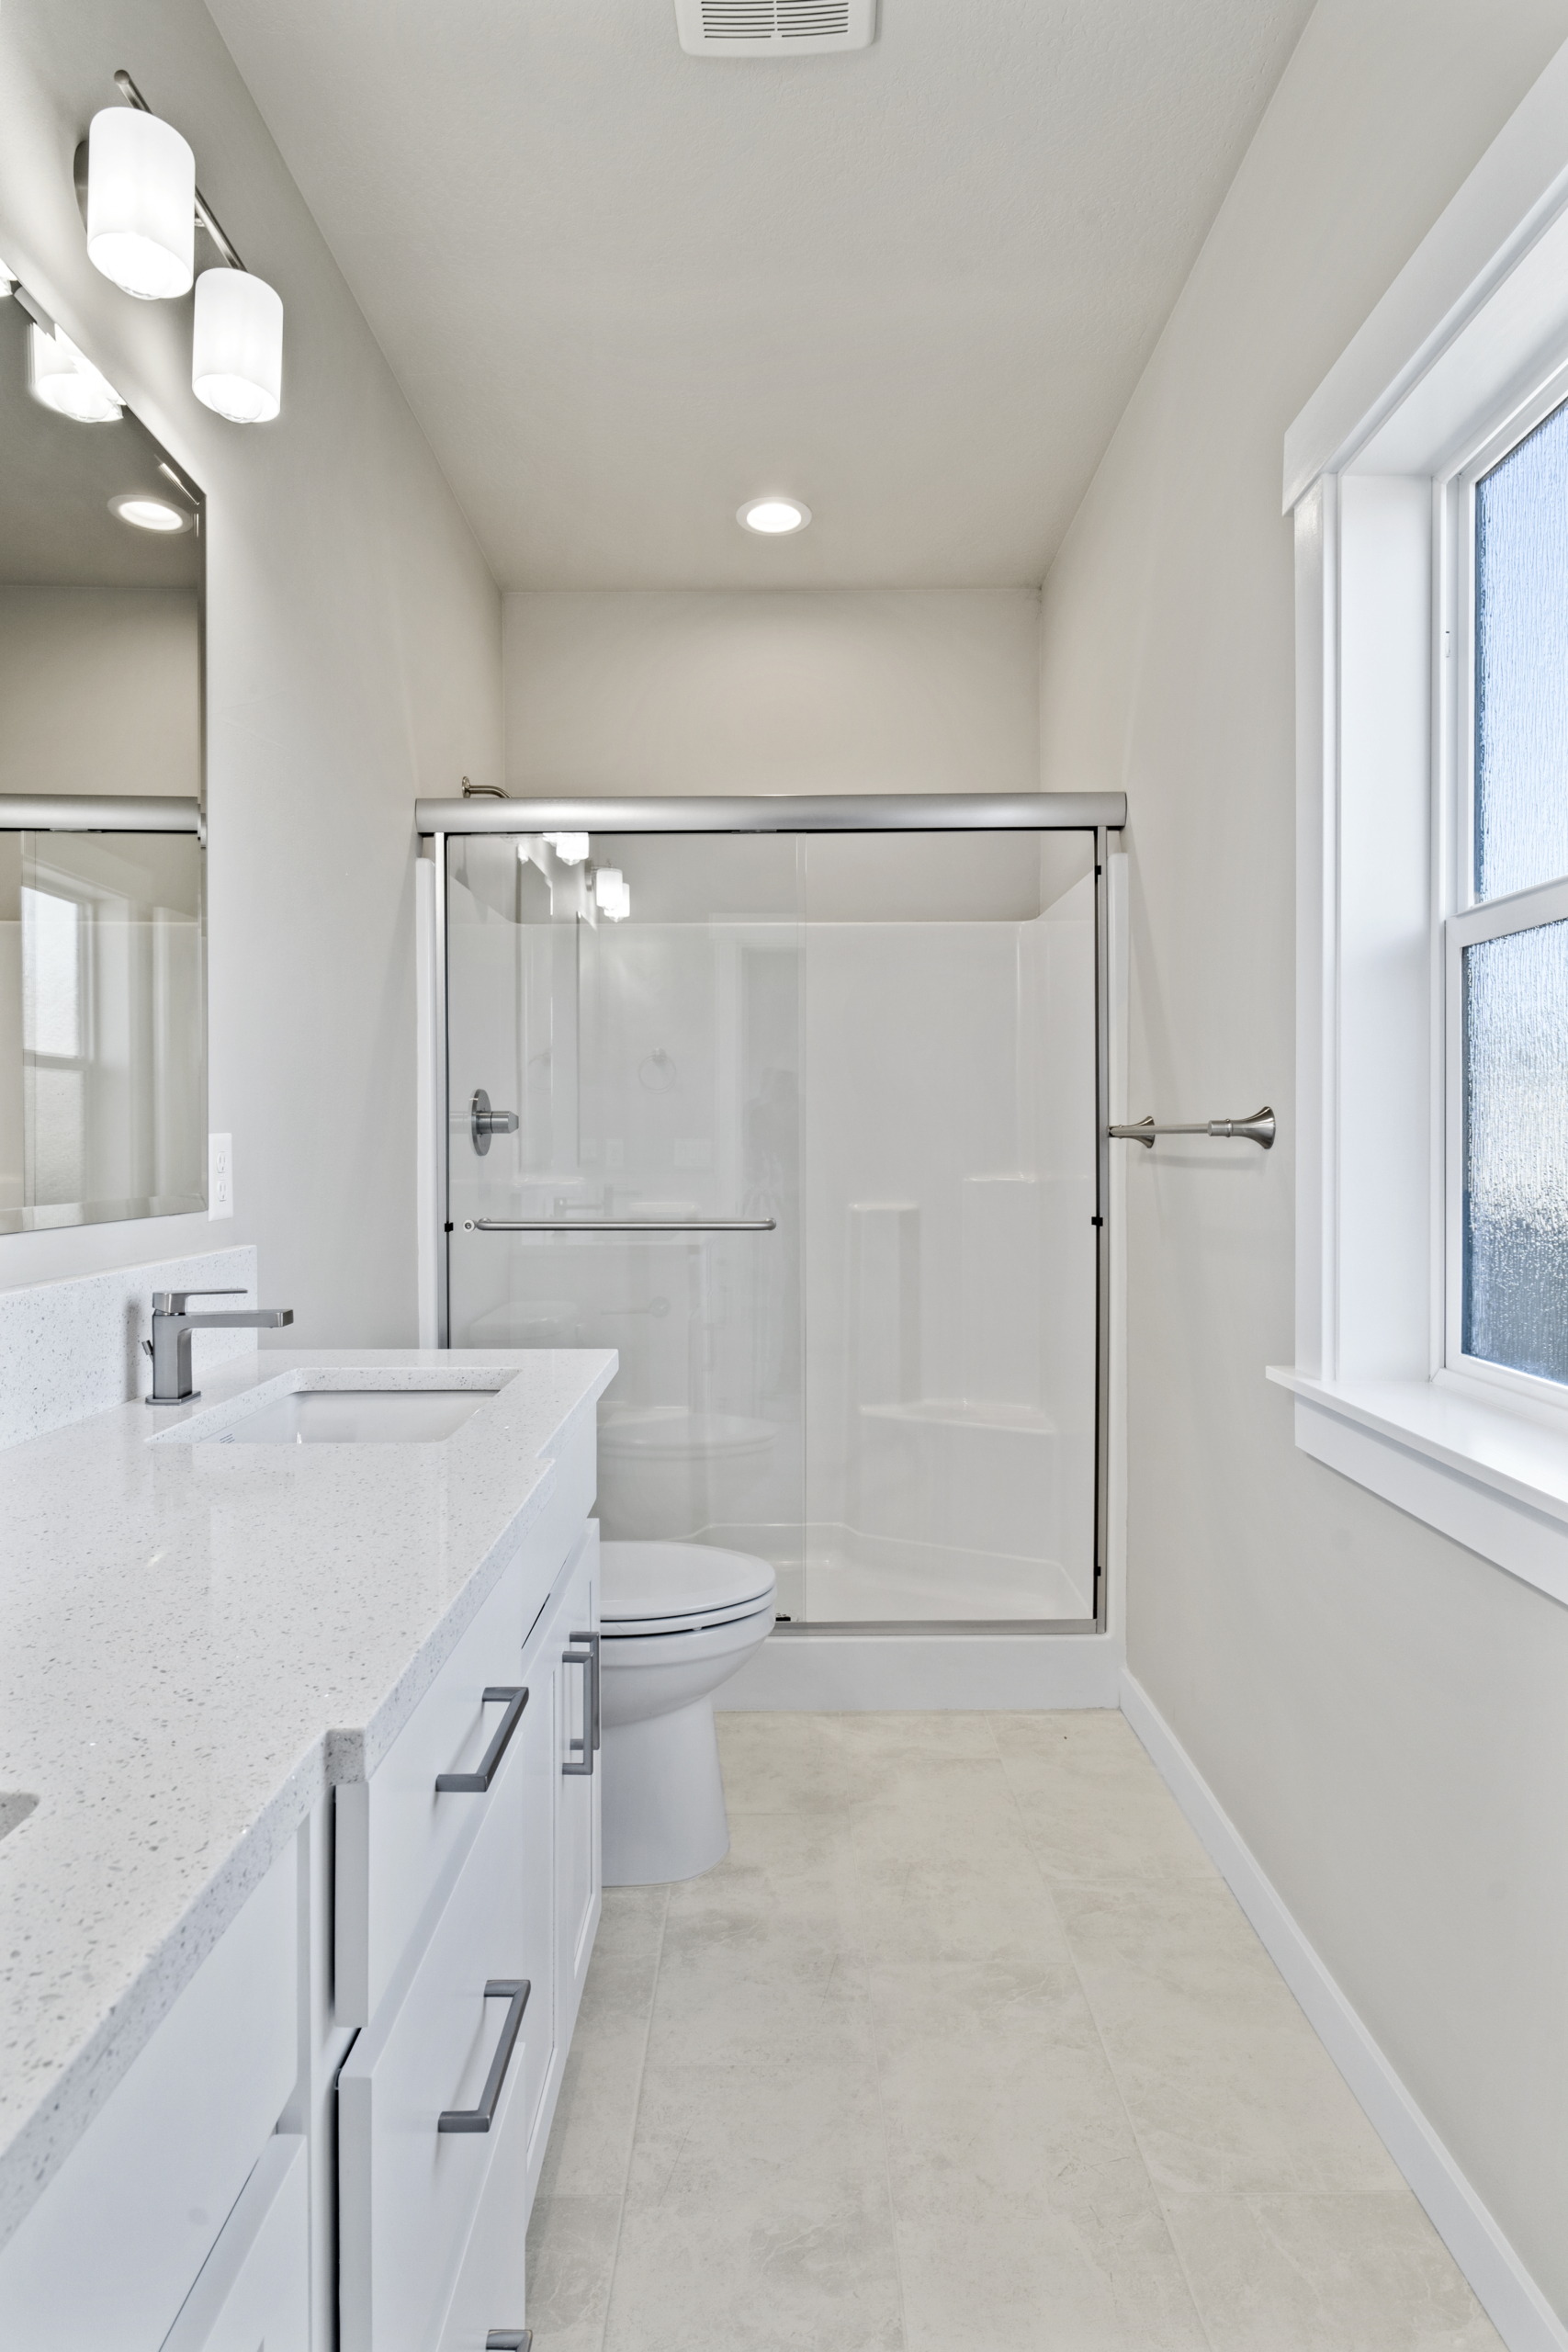 a master bathroom with a serene ambiance. the room features pristine white countertops, a sleek sink, and a stylish mirror that complements the overall aesthetic. A refreshing shower